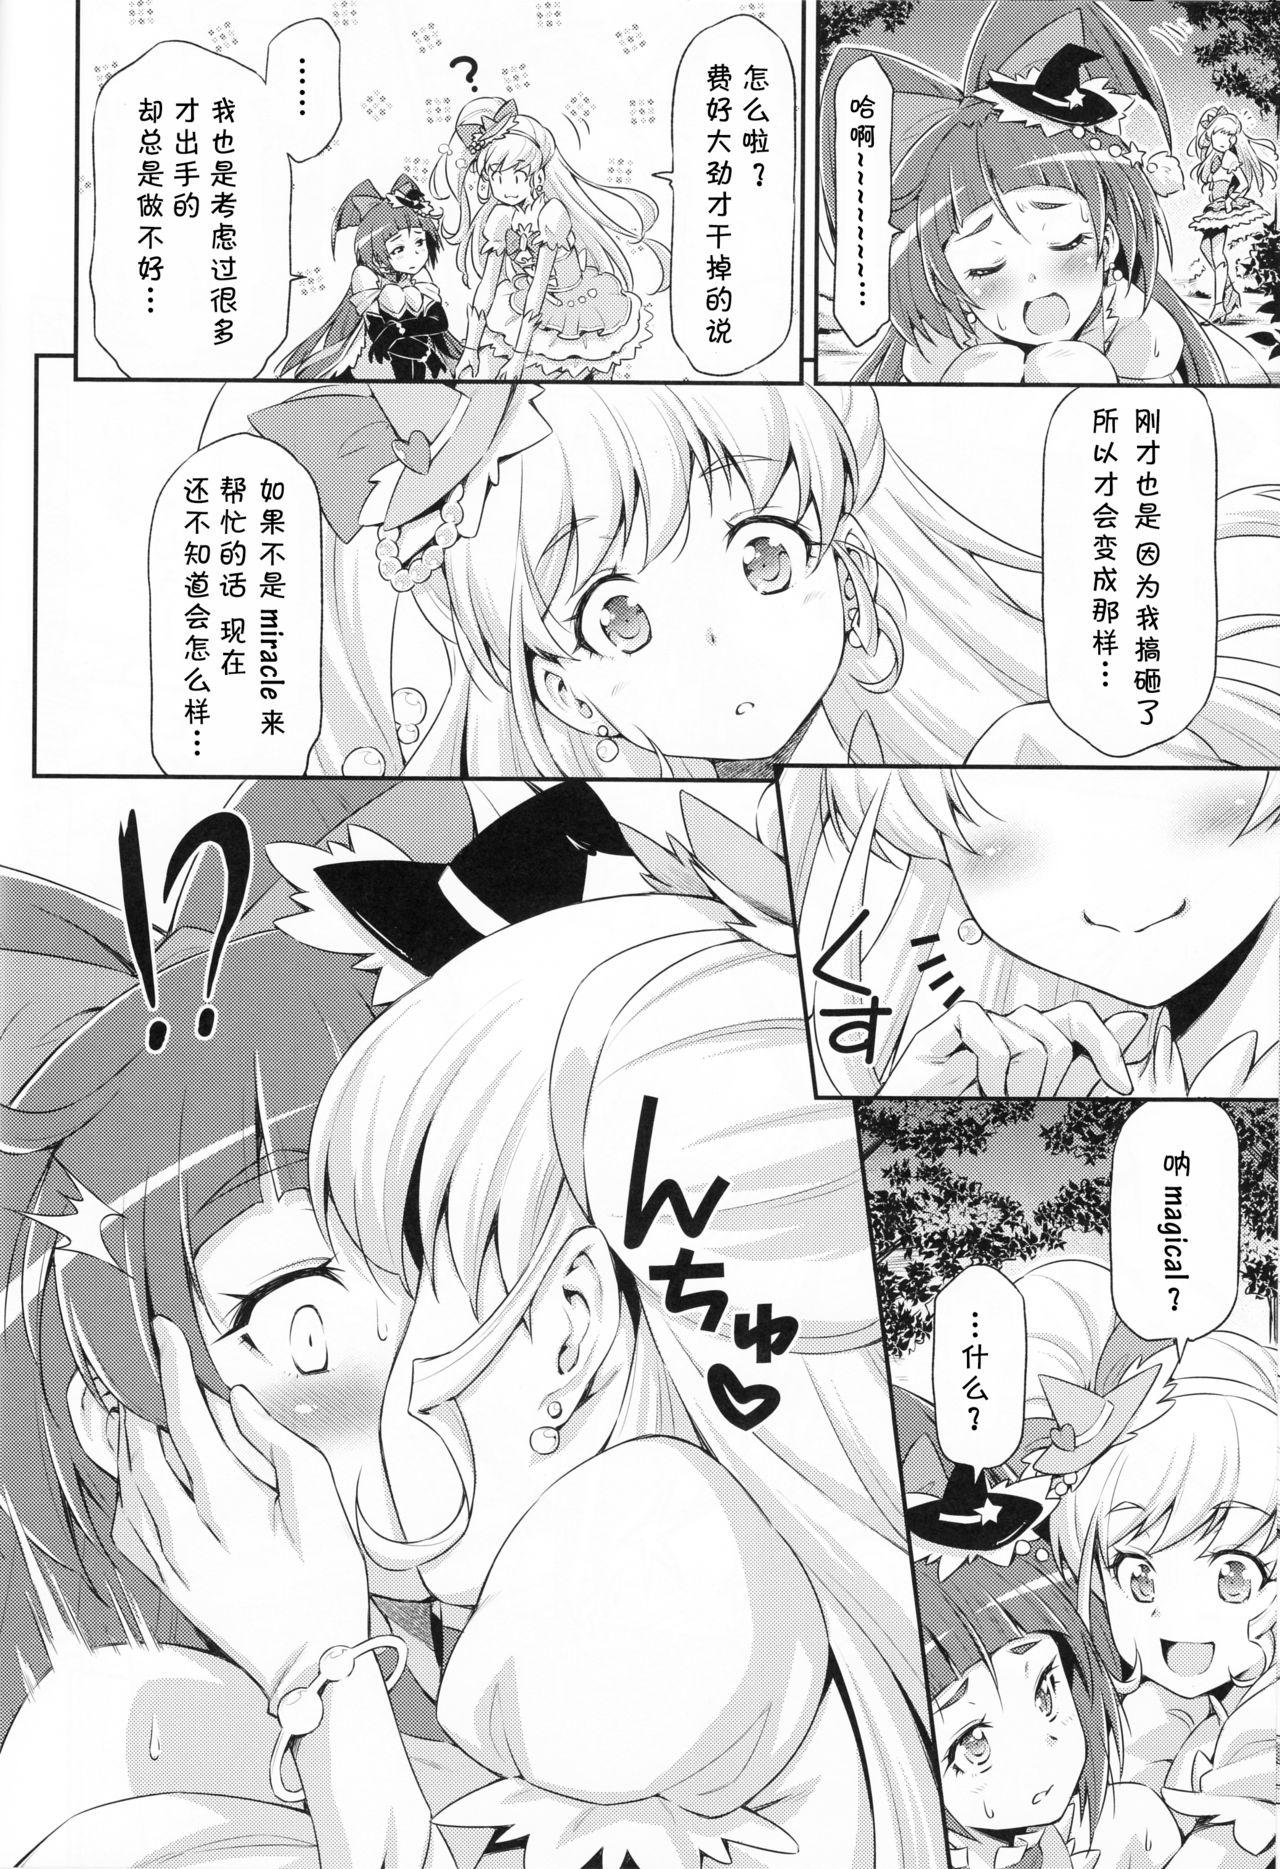 Euro Miracle Sweet Magical Fragrance - Maho girls precure Sextape - Page 10